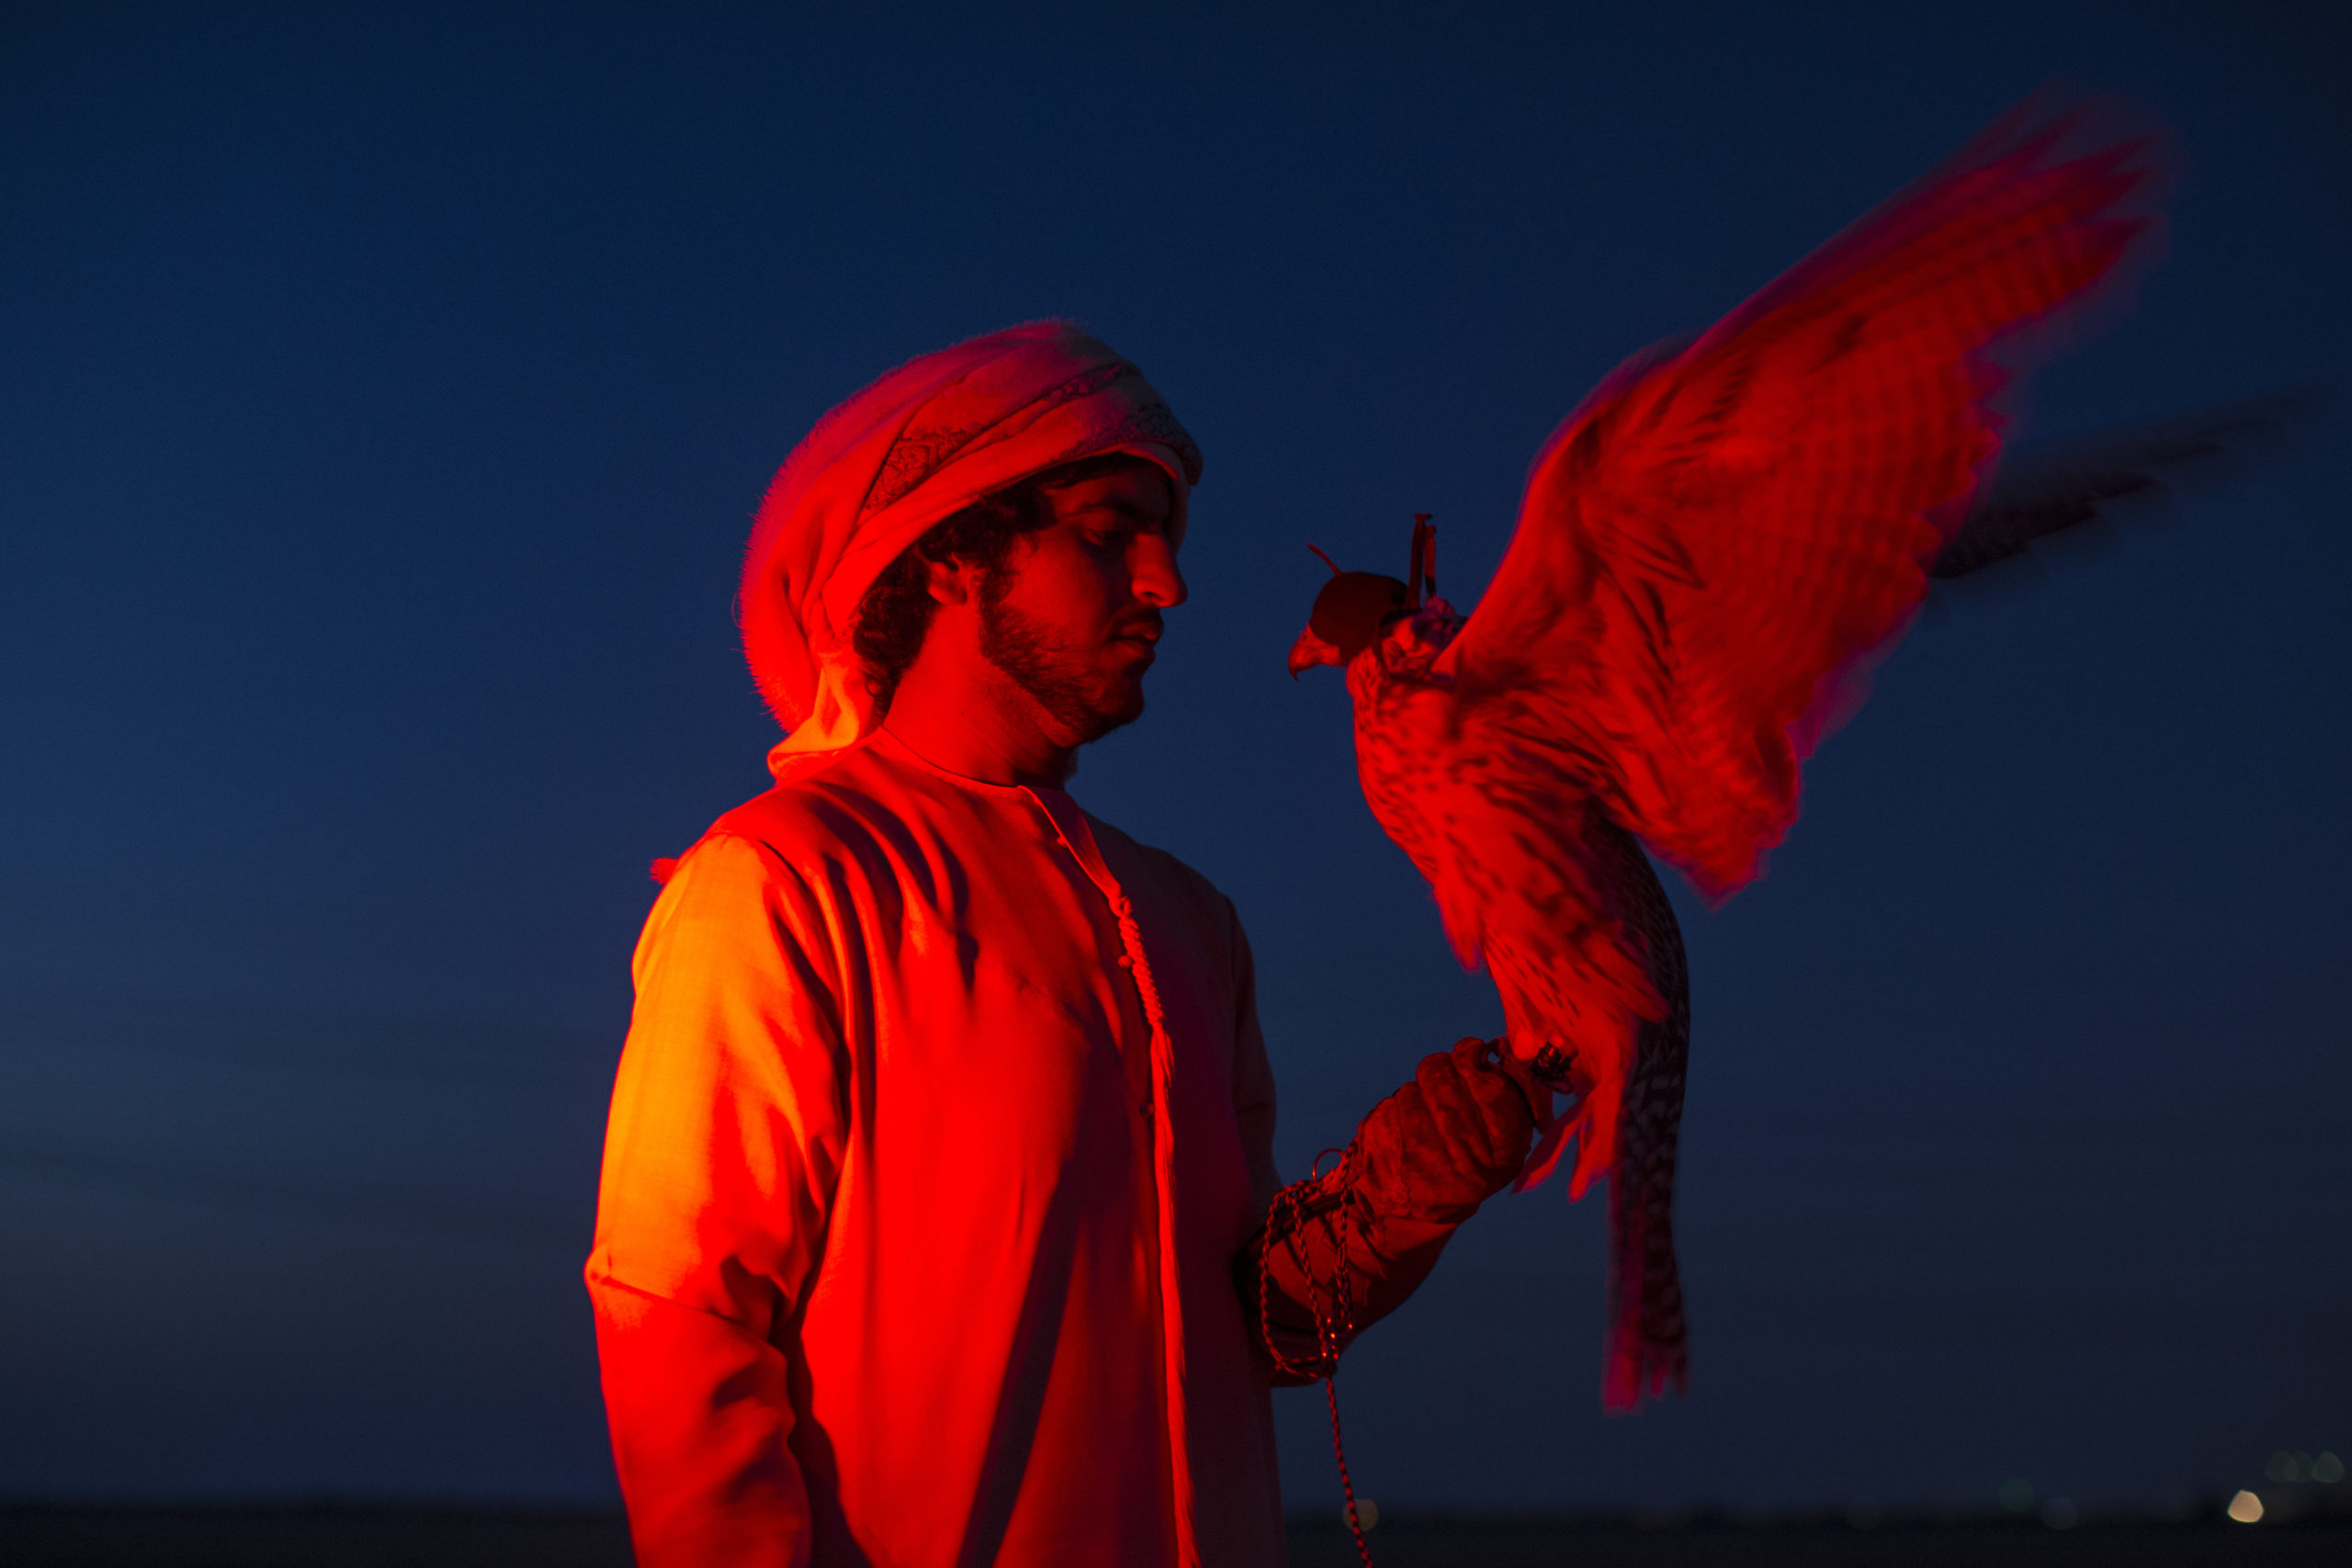 Falconers In Abu Dhabi Train Their Raptors With Drones